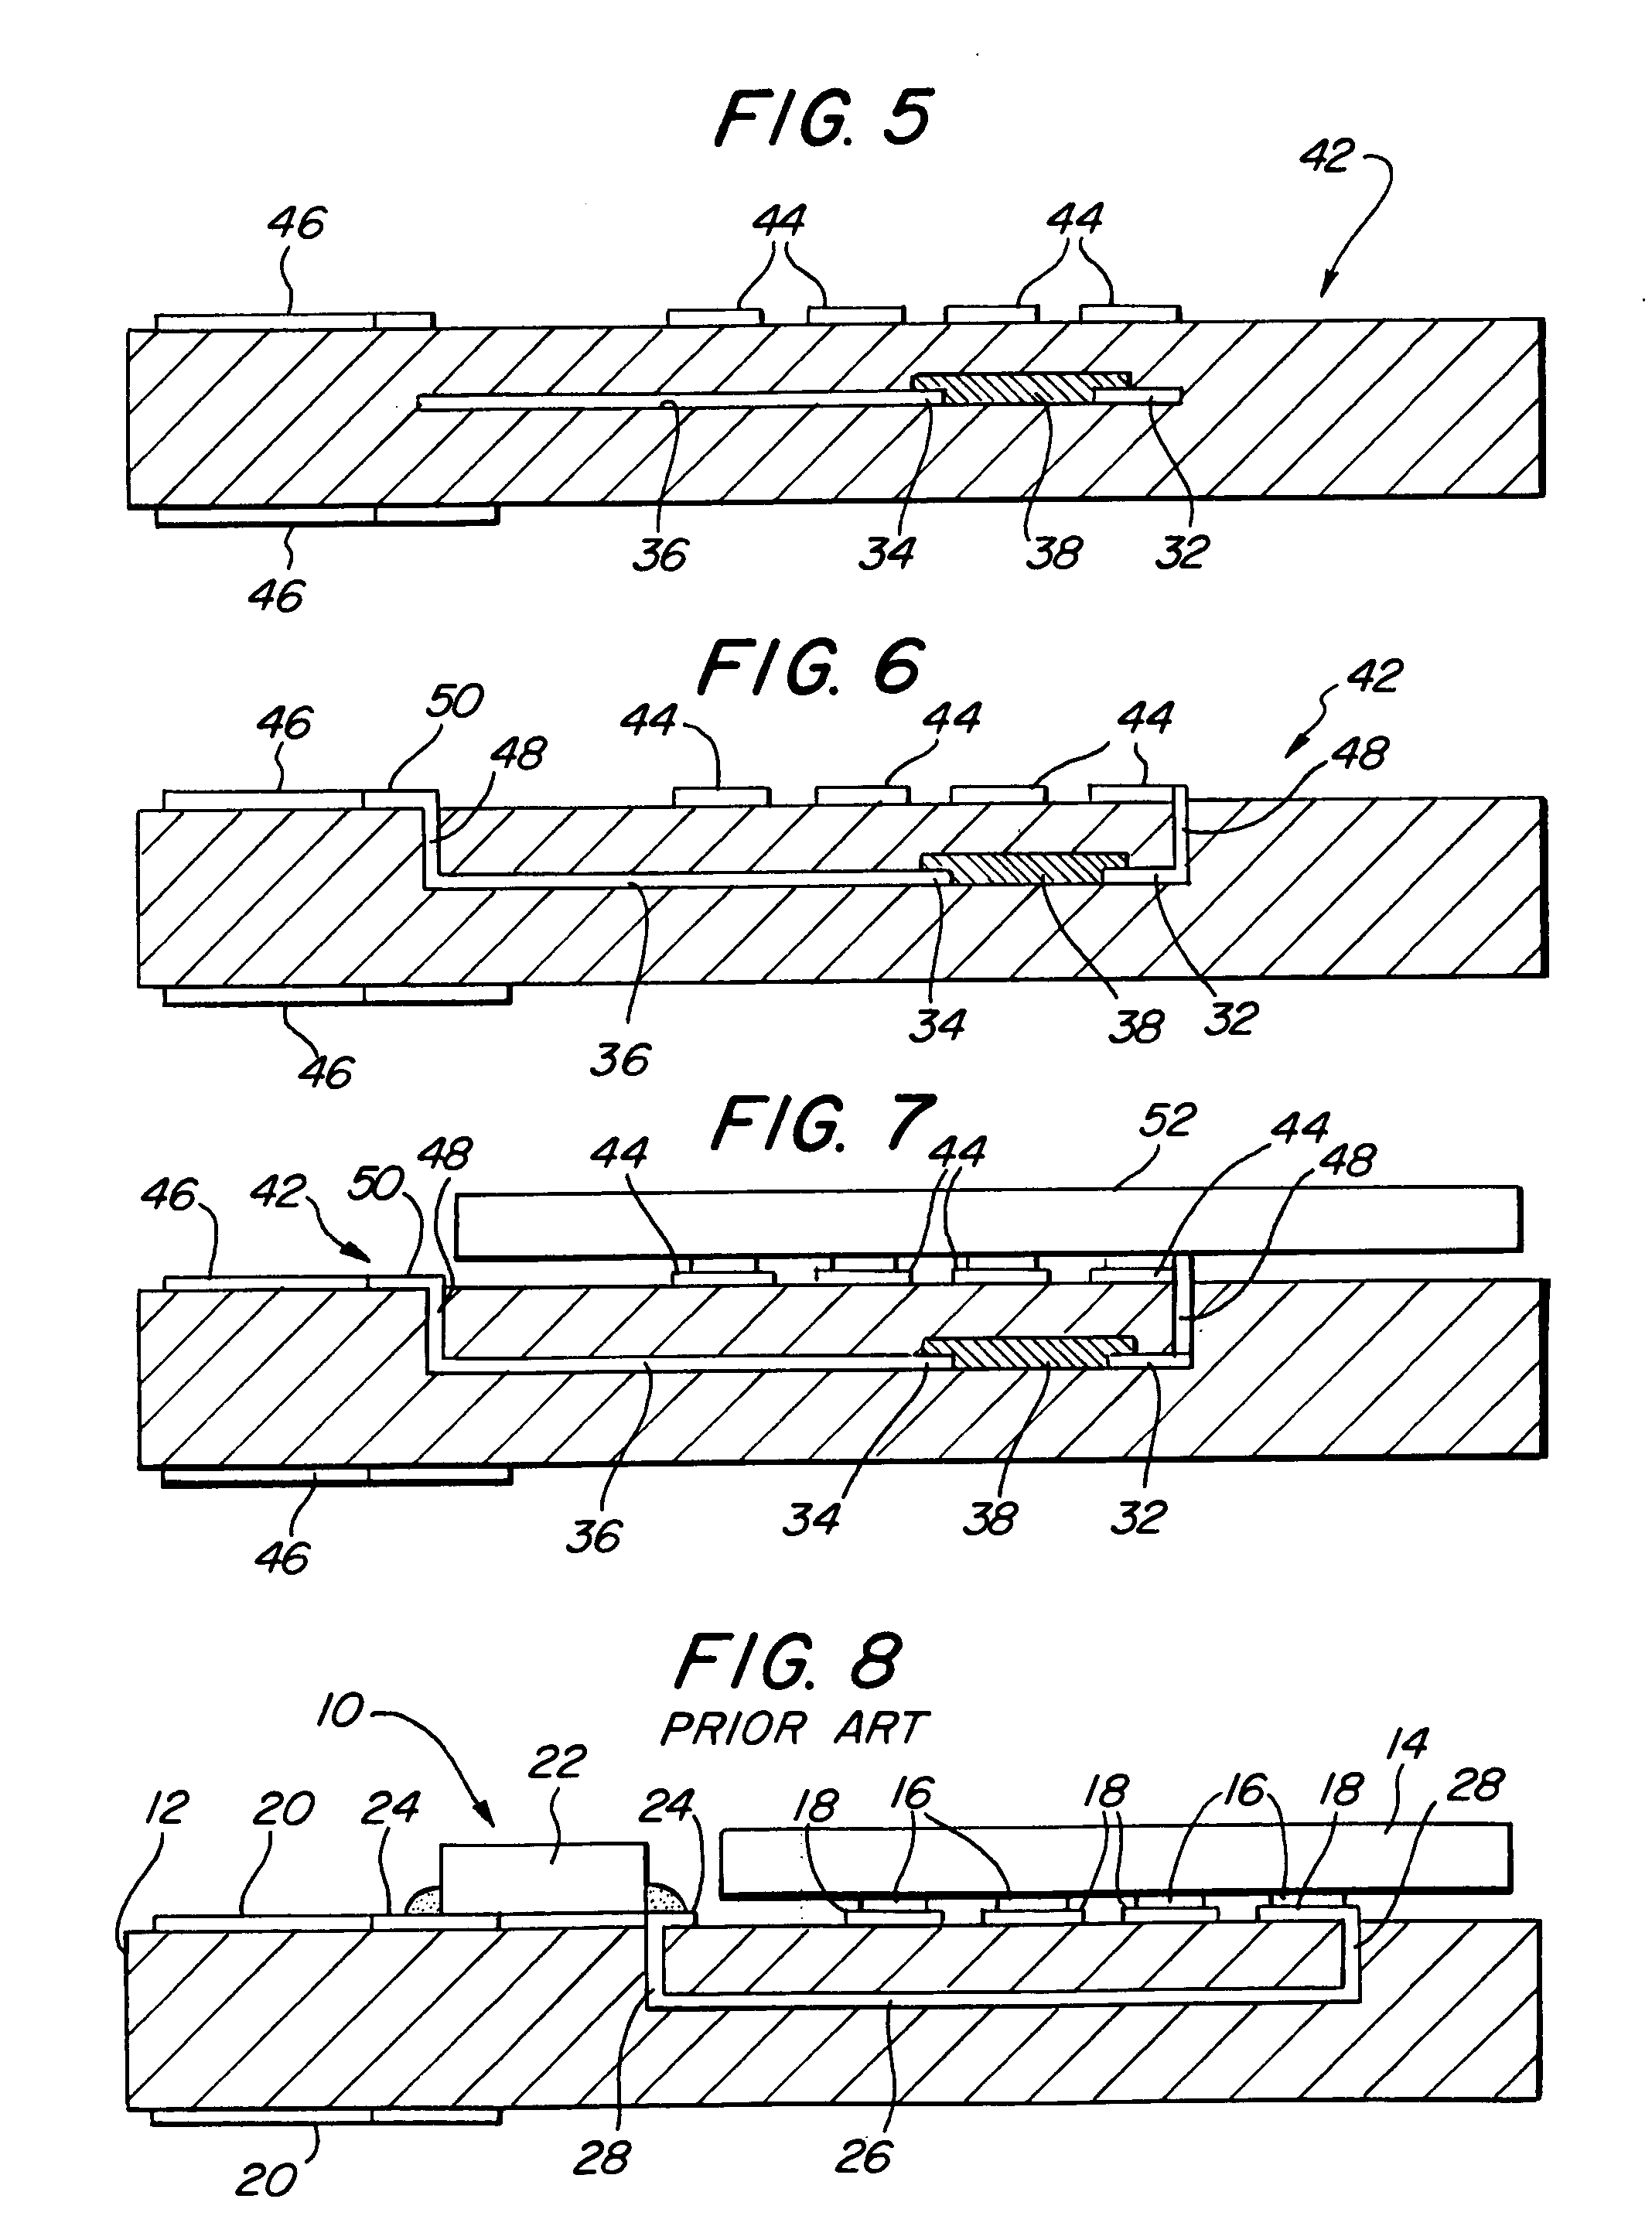 Printed circuit board memory module with embedded passive components